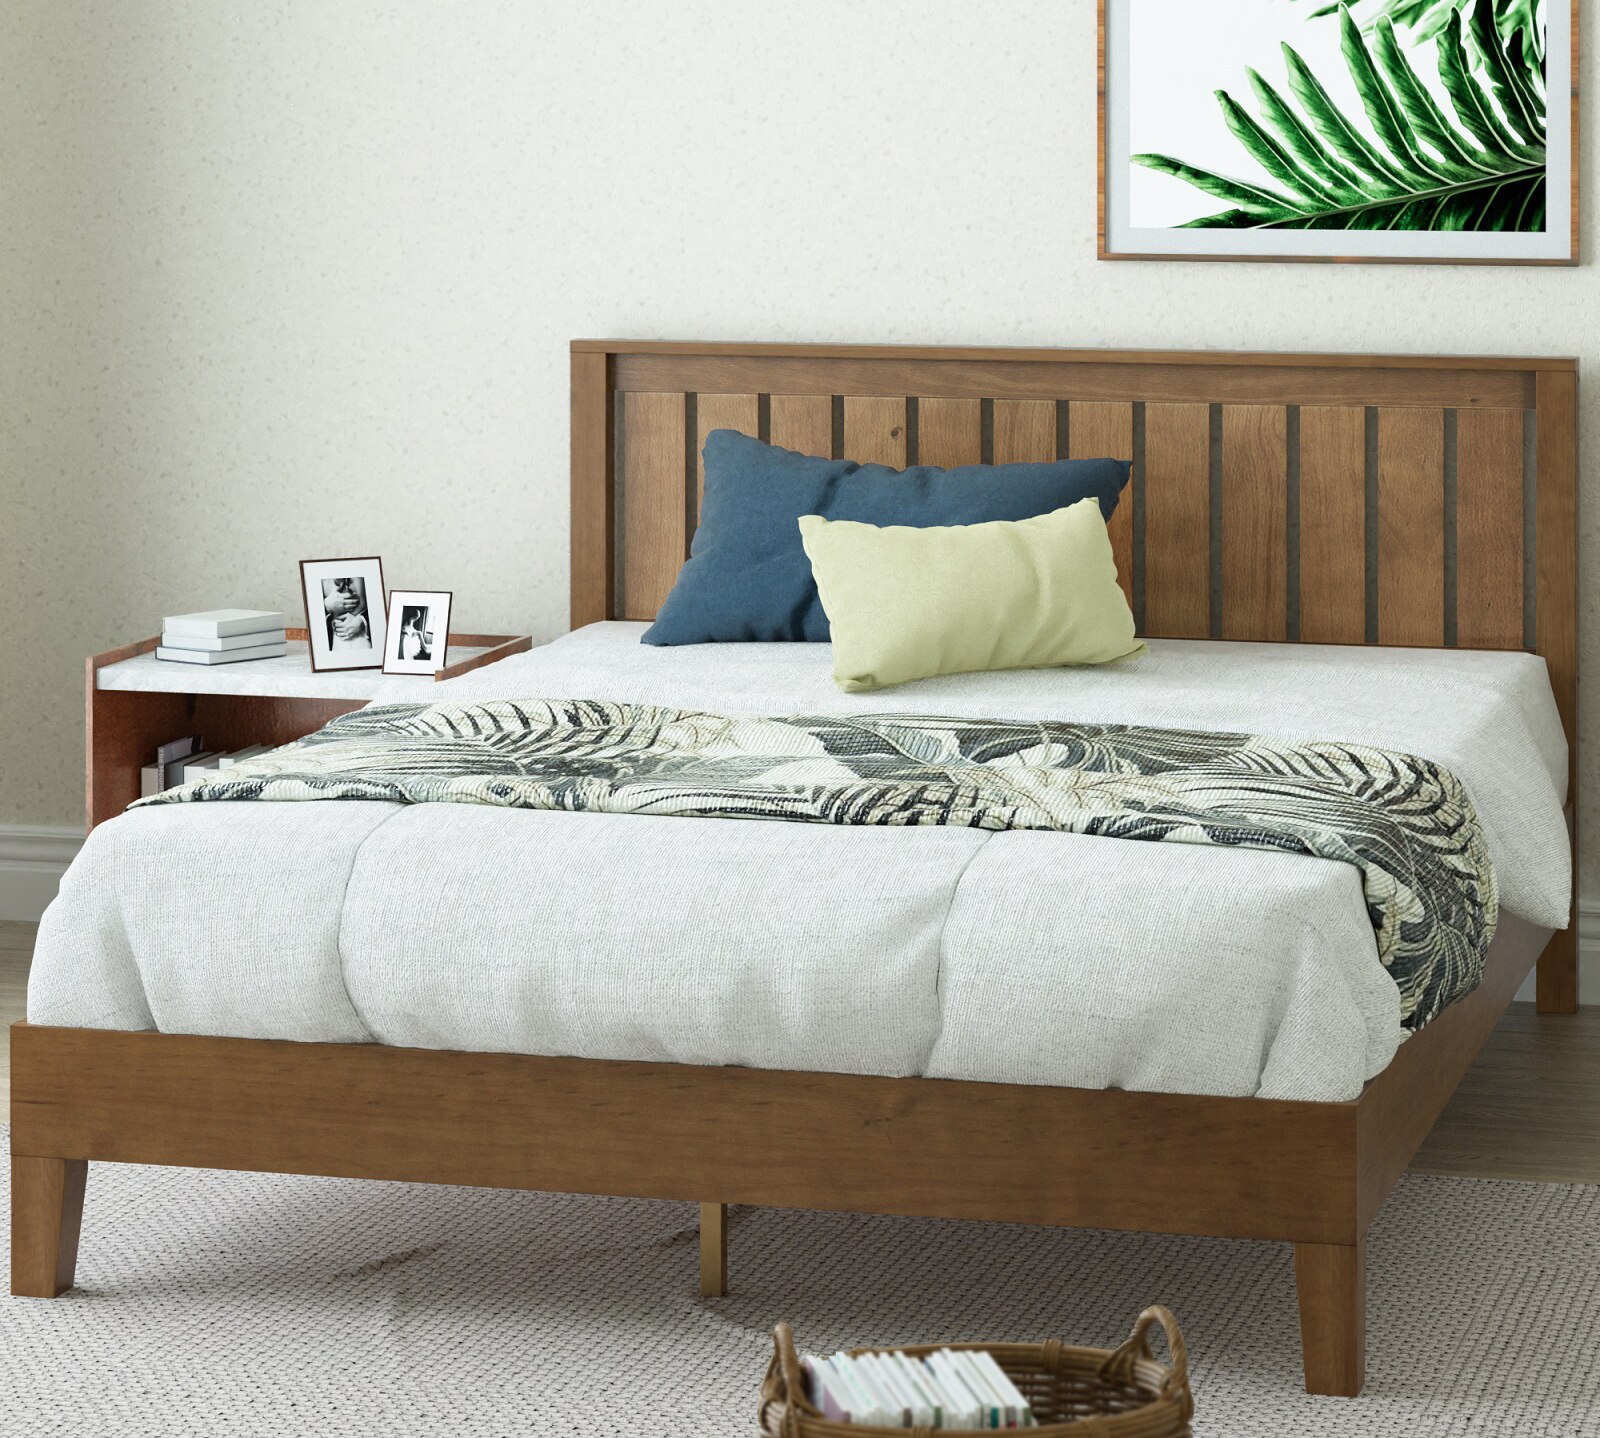 Alexis 37” Deluxe Wood Platform Bed Frame with Headboard